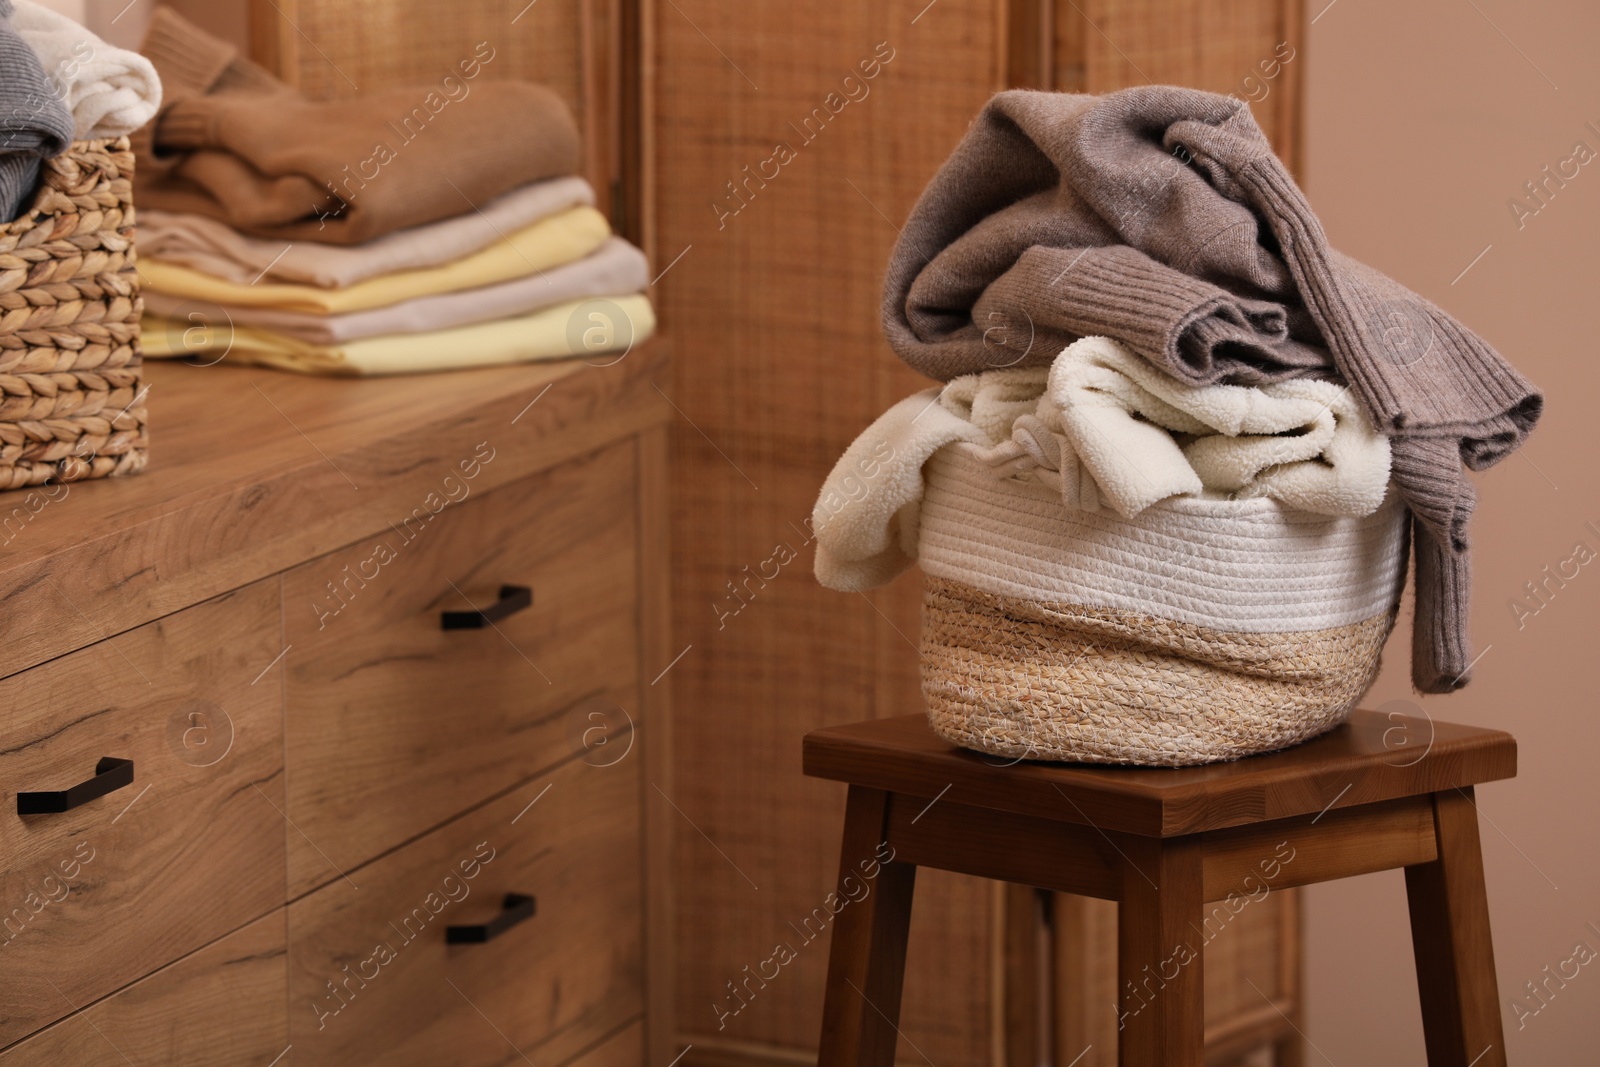 Photo of Wicker laundry basket overfilled with clothes on wooden stool indoors